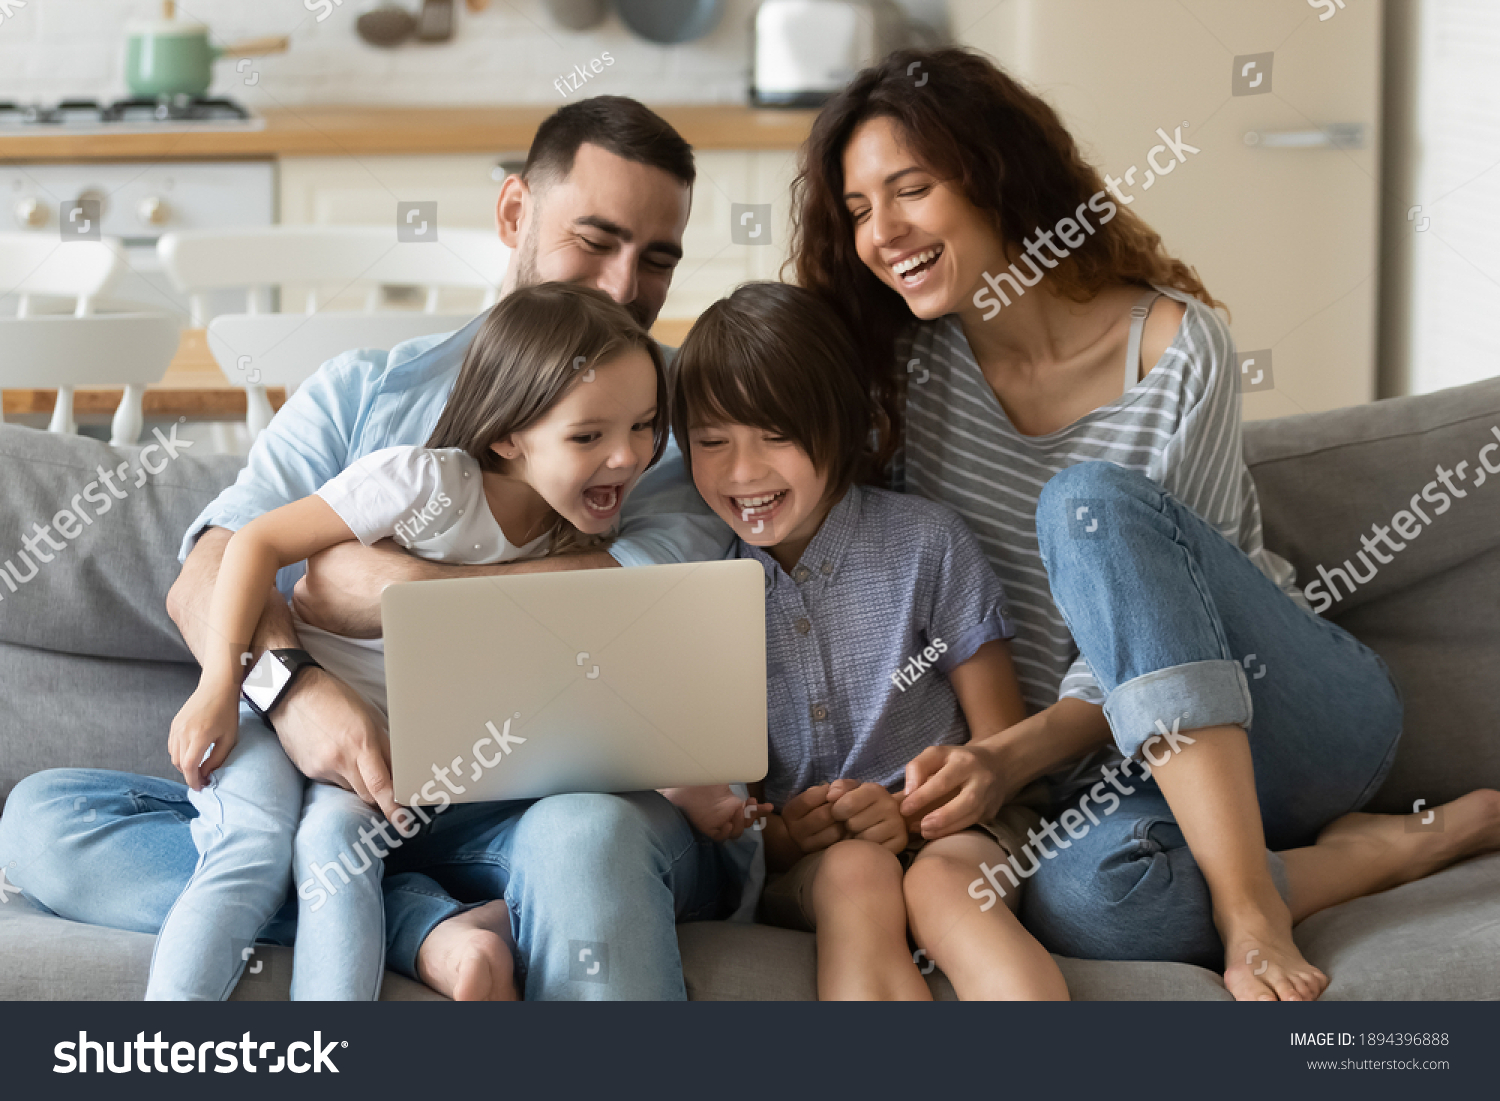 Close up happy parents with daughter and son using laptop sitting on couch at home. Smiling mother, father and cute children looking at laptop screen using video call. Family having fun with computer. #1894396888